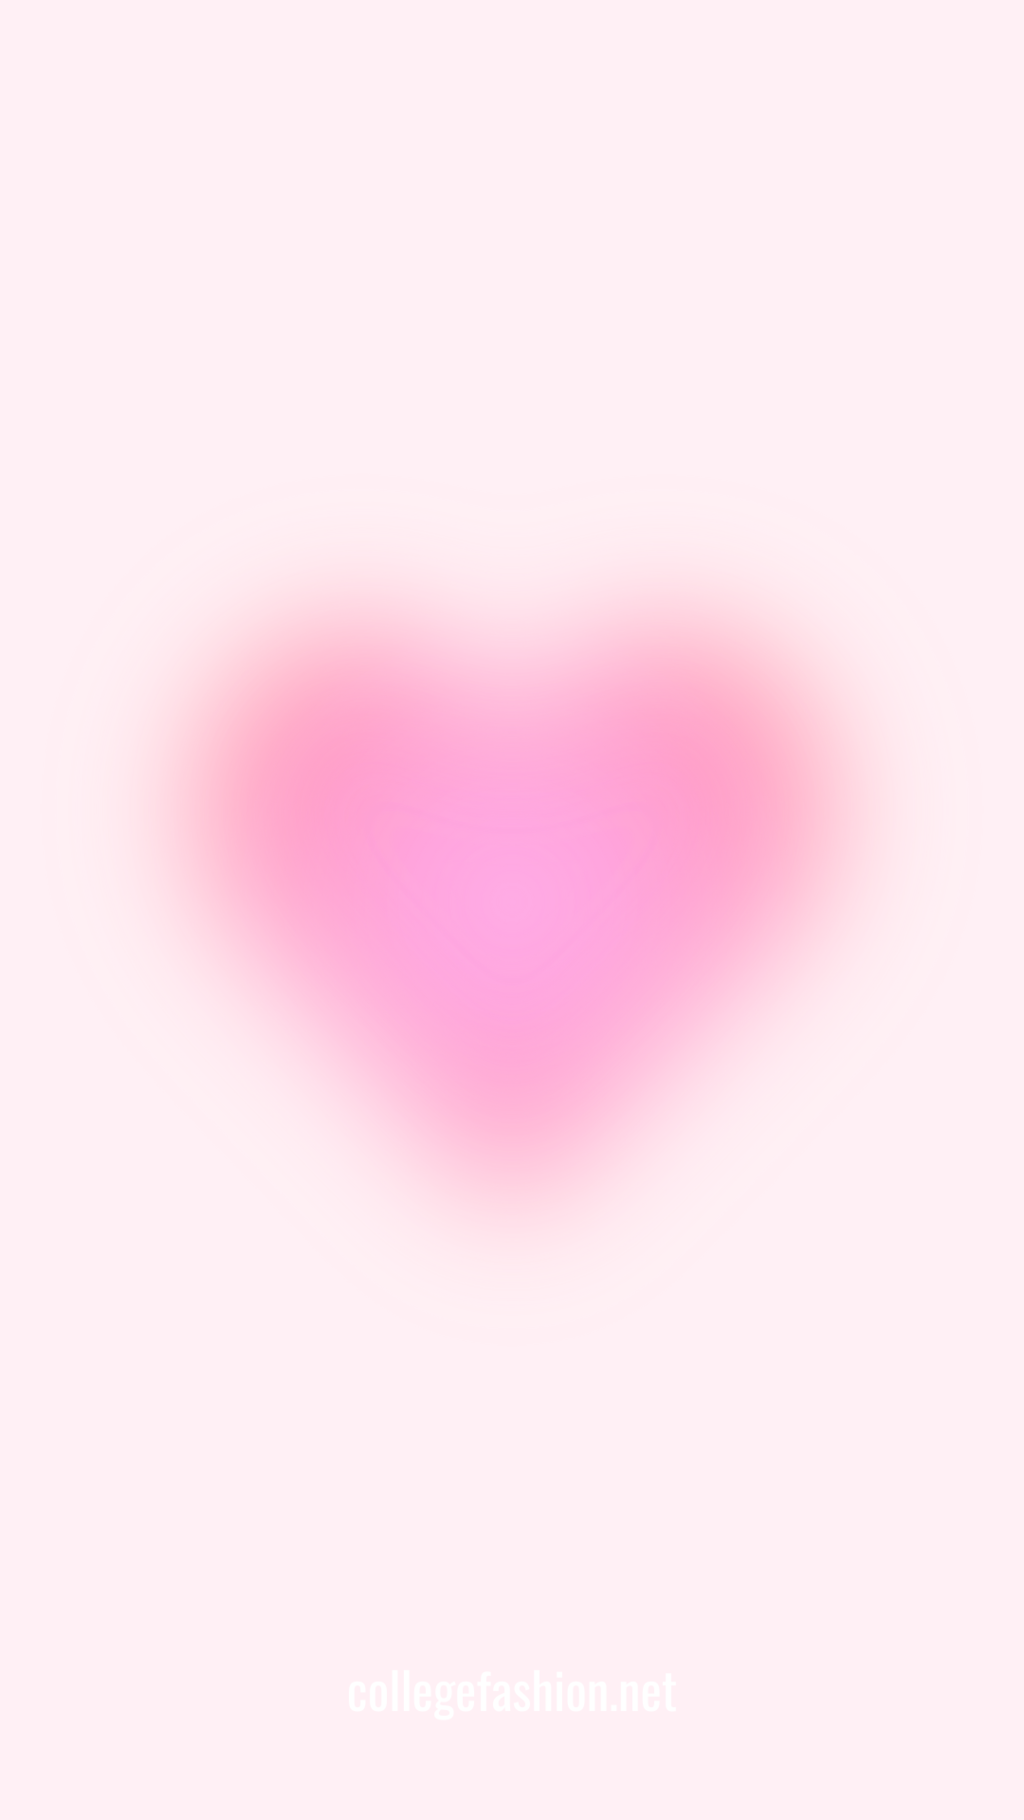 Free Pink and Beige Heart Wallpaper Background Vector Image-thanhphatduhoc.com.vn